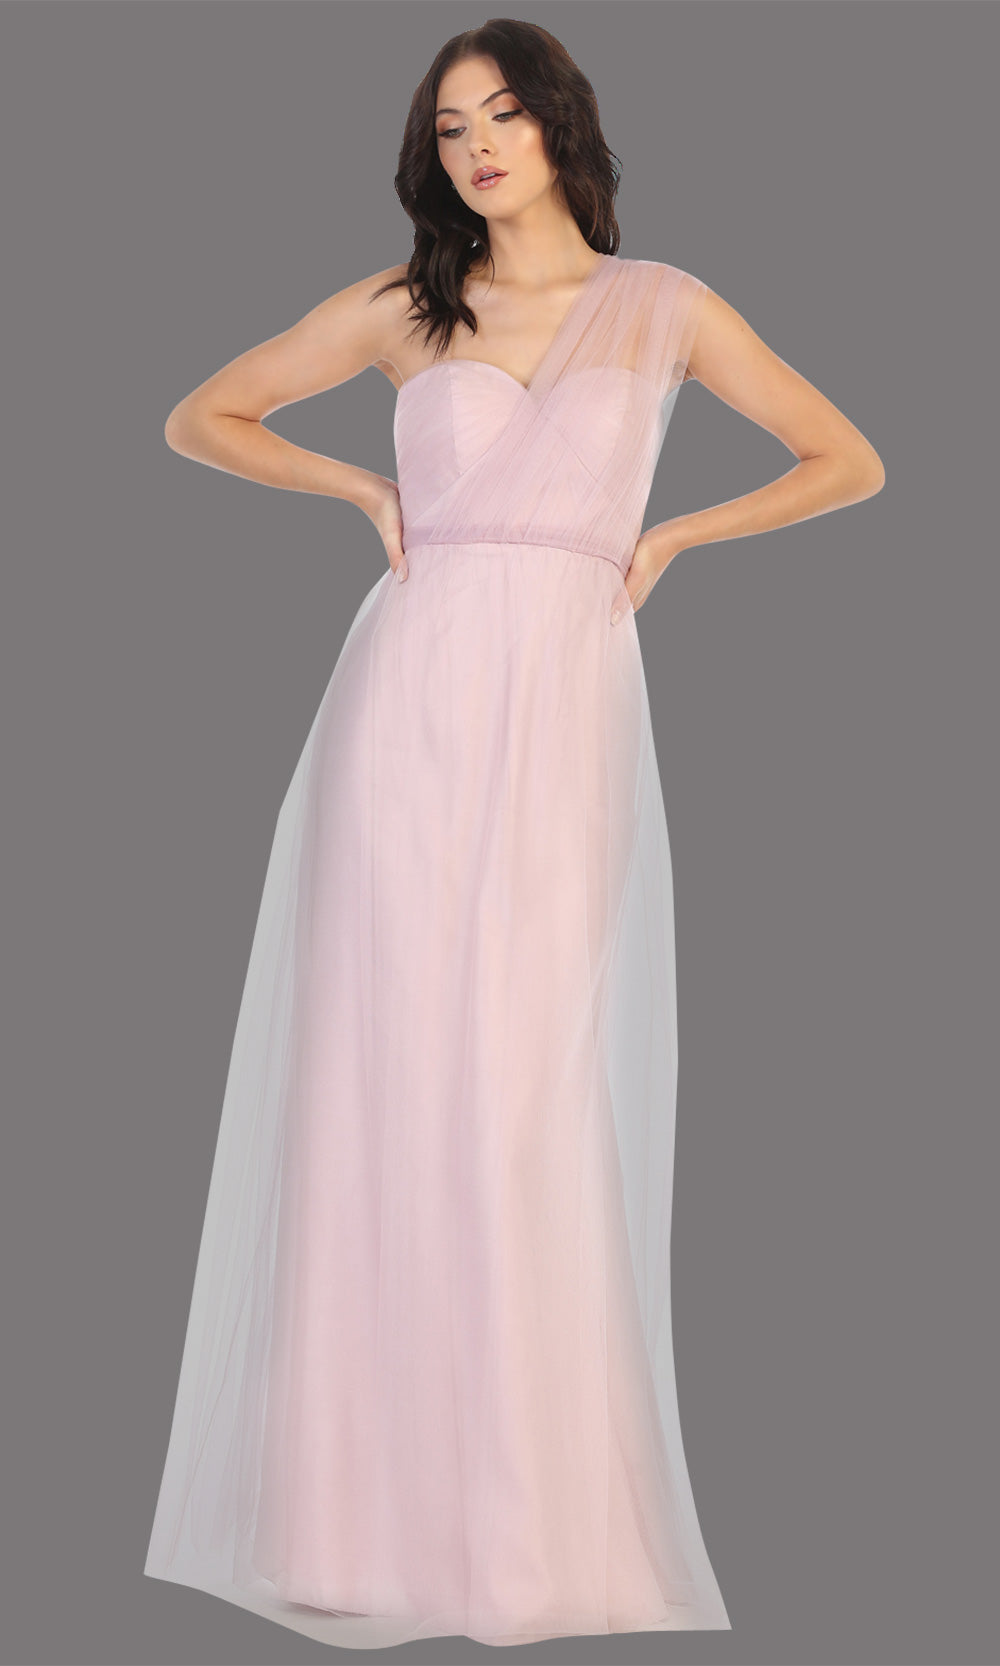 Mayqueen MQ1728 long mauve flowy tulle mesh dress.Dusty rose evening dress is perfect for bridesmaid dresses,formal wedding guest party dress.This multiway convertible tulle dress allows you to wear a dress w/different necklines.Plus sizes avai